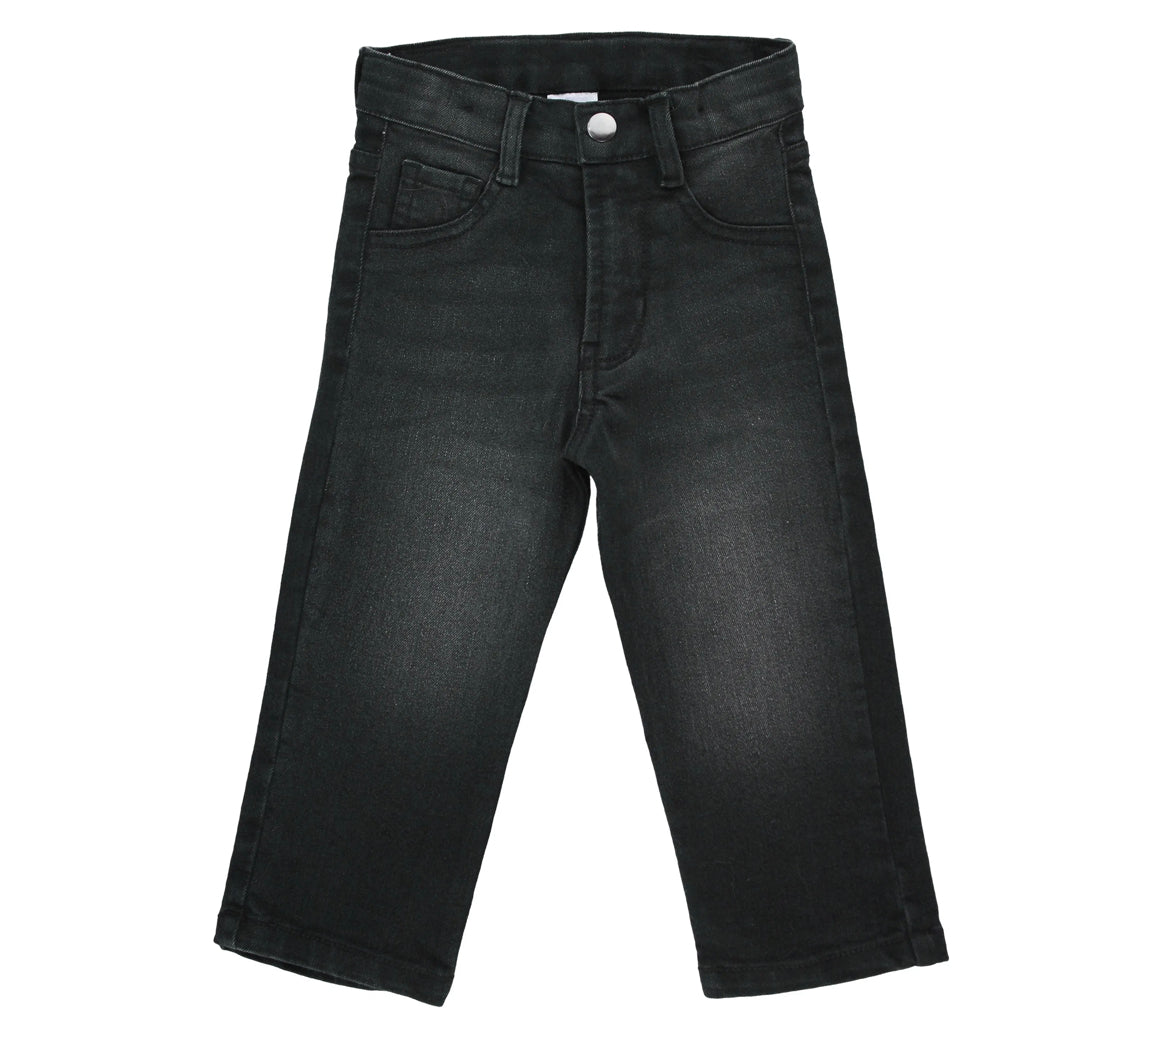 Ruffle Butts / Rugged Butts | Black Dark Wash Straight Jeans